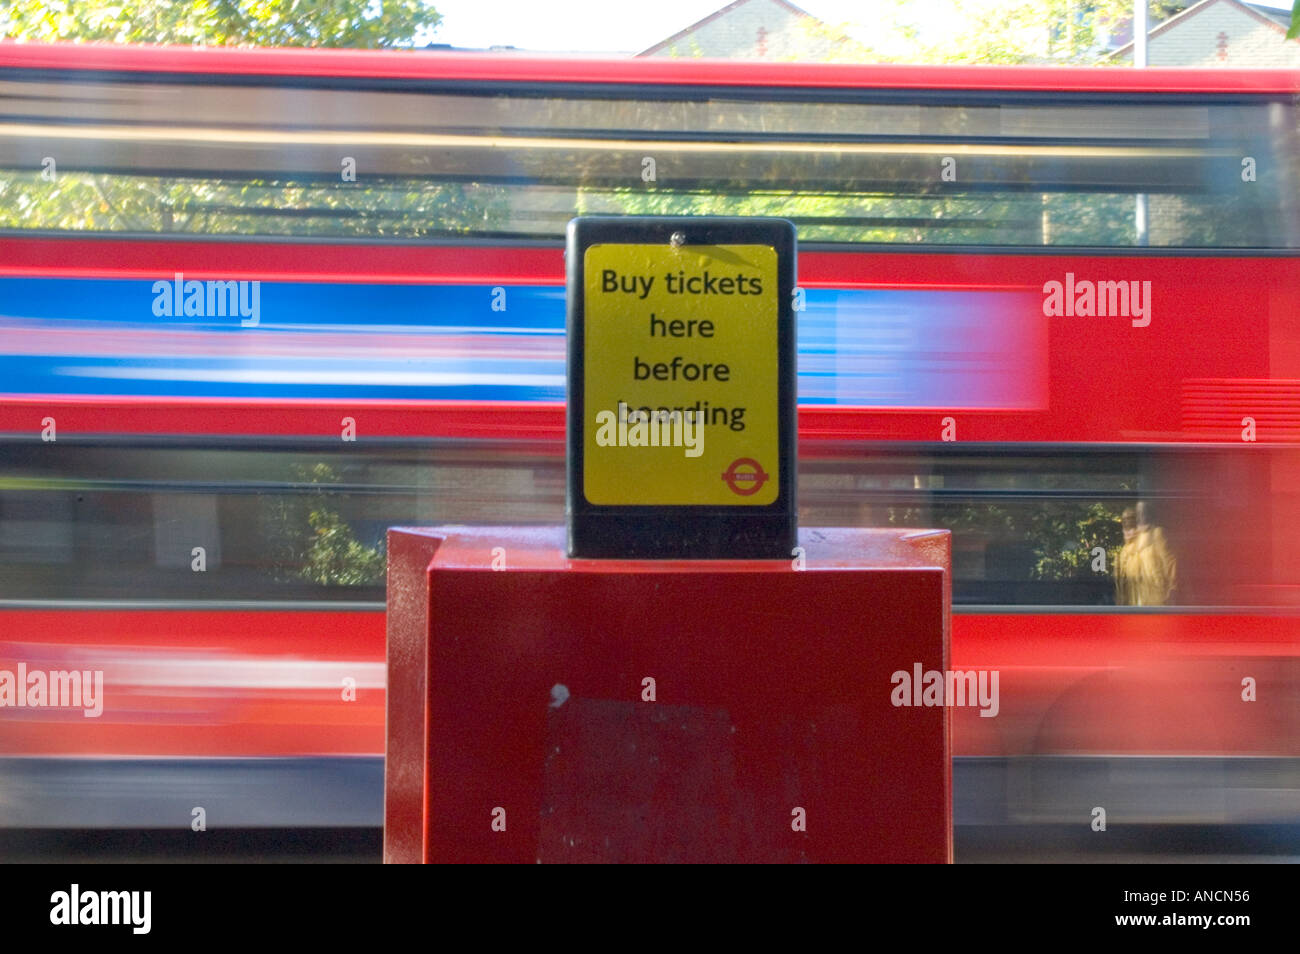 Bus ticket machine in the foreground with a blurred affect speeding bus in the background. Stock Photo